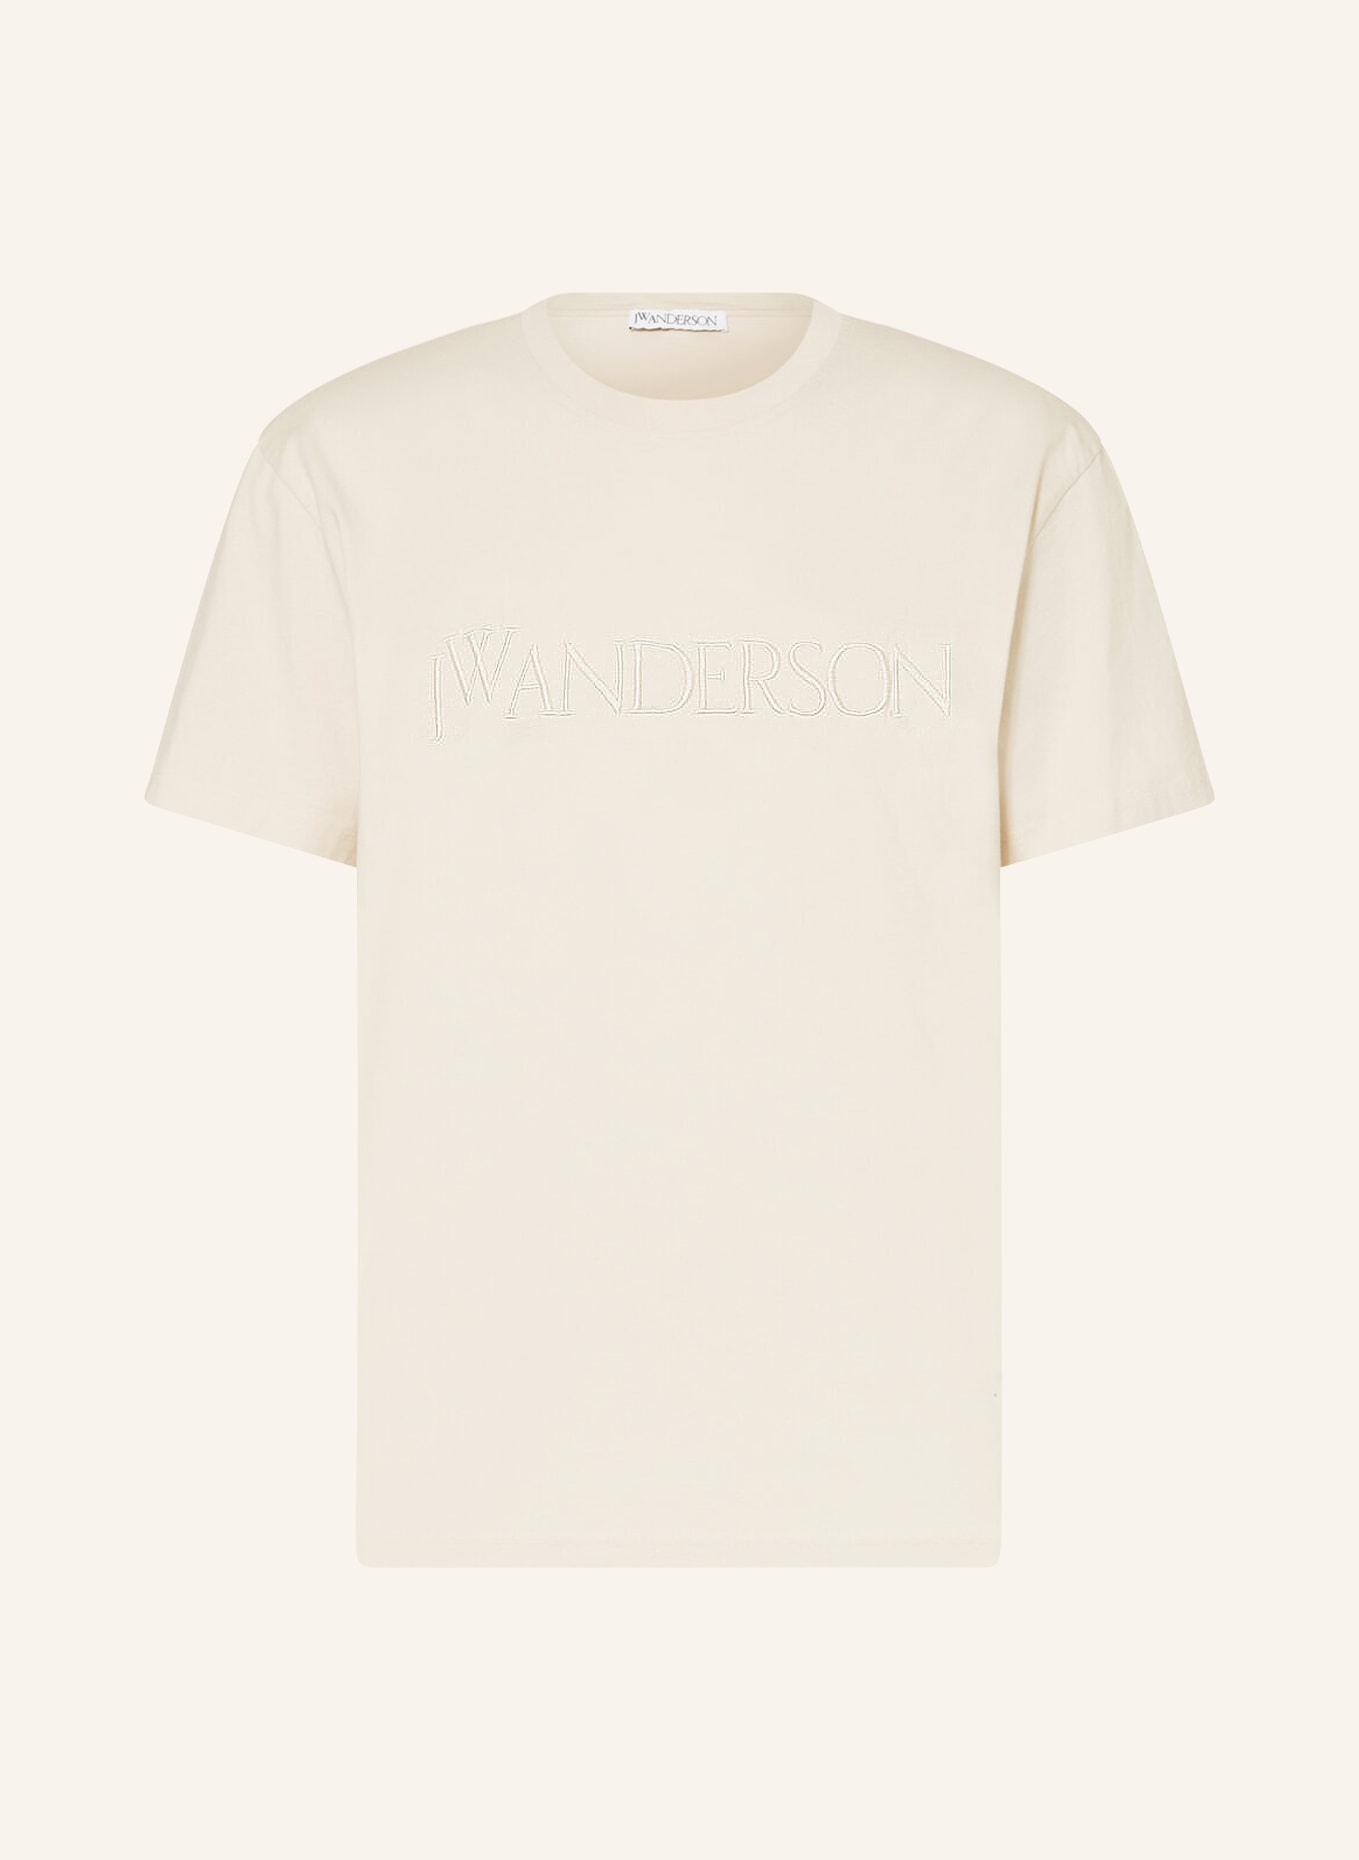 JW ANDERSON T-shirt with embroidery, Color: BEIGE (Image 1)